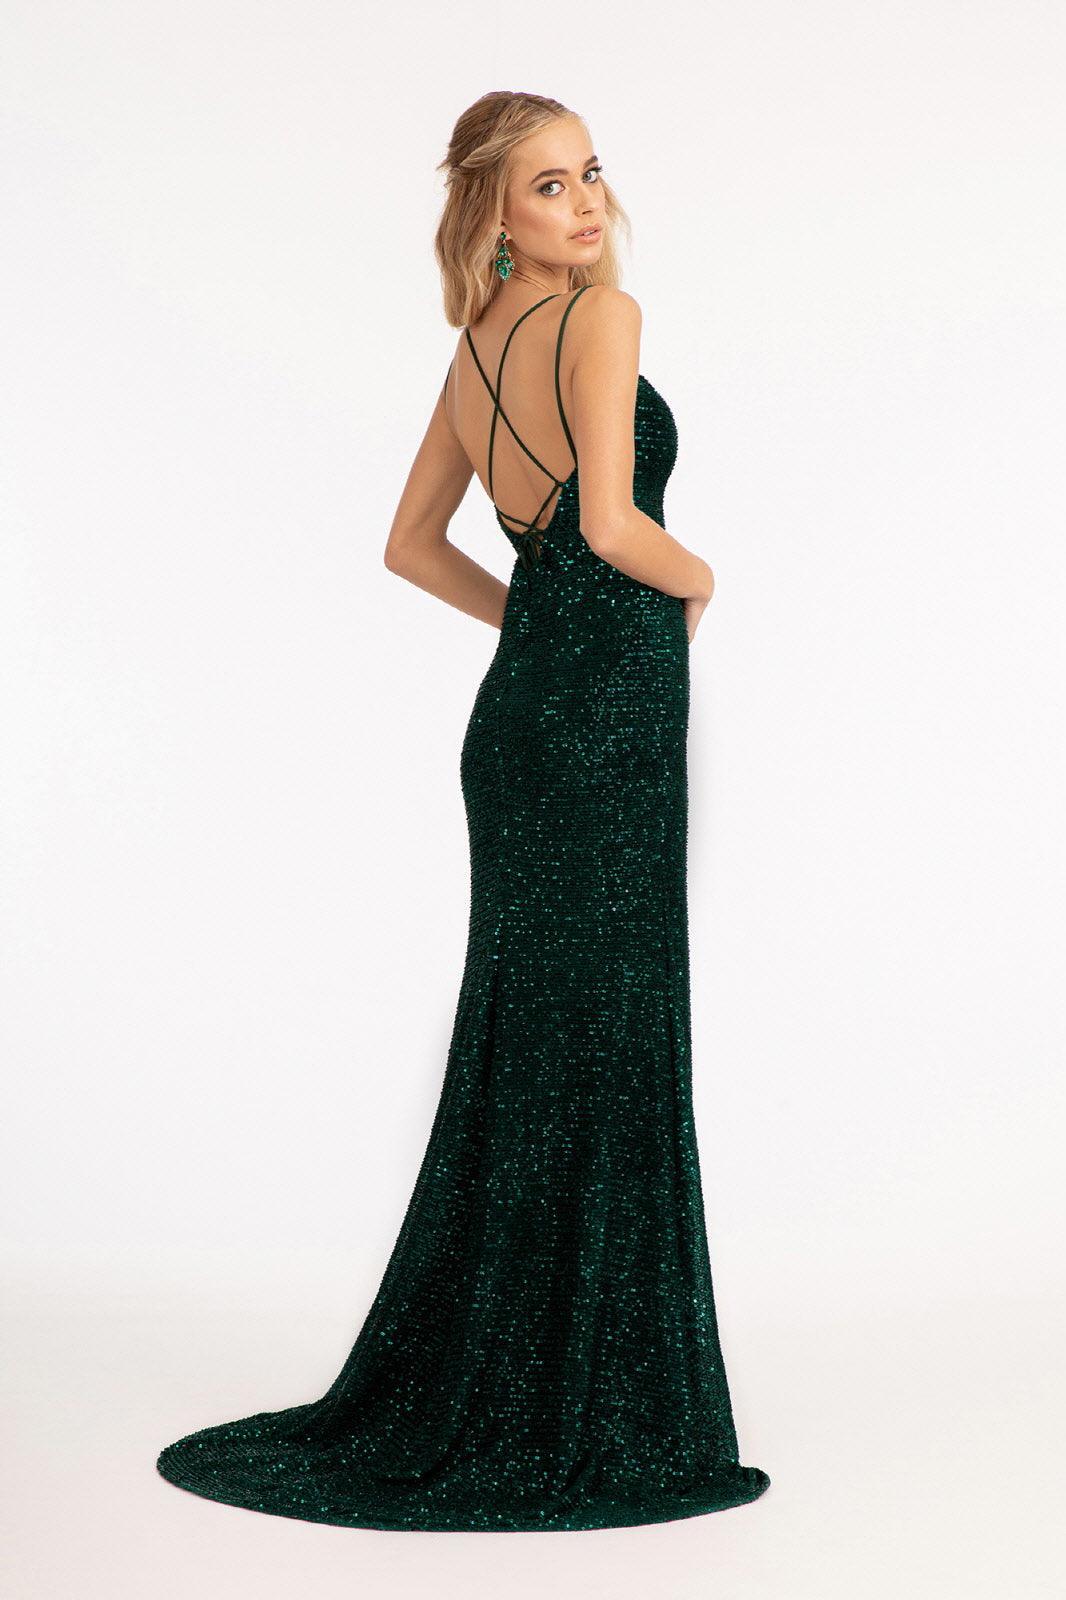 Long Spaghetti Strap Mermaid Evening Dress Sale - The Dress Outlet